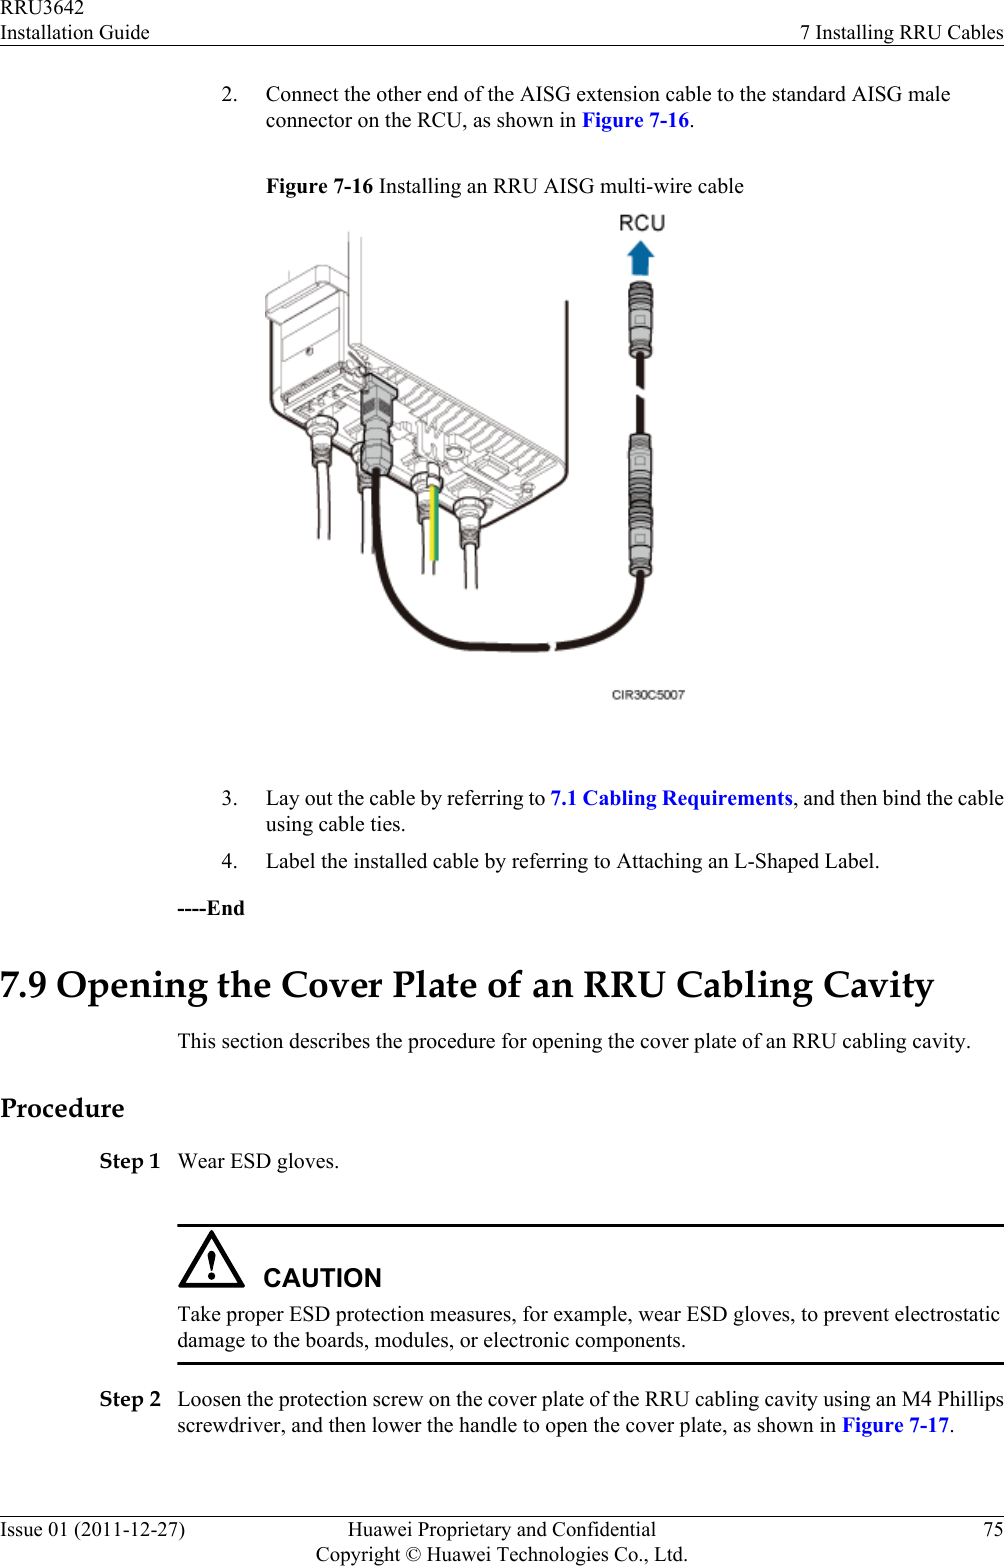 2. Connect the other end of the AISG extension cable to the standard AISG maleconnector on the RCU, as shown in Figure 7-16.Figure 7-16 Installing an RRU AISG multi-wire cable 3. Lay out the cable by referring to 7.1 Cabling Requirements, and then bind the cableusing cable ties.4. Label the installed cable by referring to Attaching an L-Shaped Label.----End7.9 Opening the Cover Plate of an RRU Cabling CavityThis section describes the procedure for opening the cover plate of an RRU cabling cavity.ProcedureStep 1 Wear ESD gloves.CAUTIONTake proper ESD protection measures, for example, wear ESD gloves, to prevent electrostaticdamage to the boards, modules, or electronic components.Step 2 Loosen the protection screw on the cover plate of the RRU cabling cavity using an M4 Phillipsscrewdriver, and then lower the handle to open the cover plate, as shown in Figure 7-17.RRU3642Installation Guide 7 Installing RRU CablesIssue 01 (2011-12-27) Huawei Proprietary and ConfidentialCopyright © Huawei Technologies Co., Ltd.75